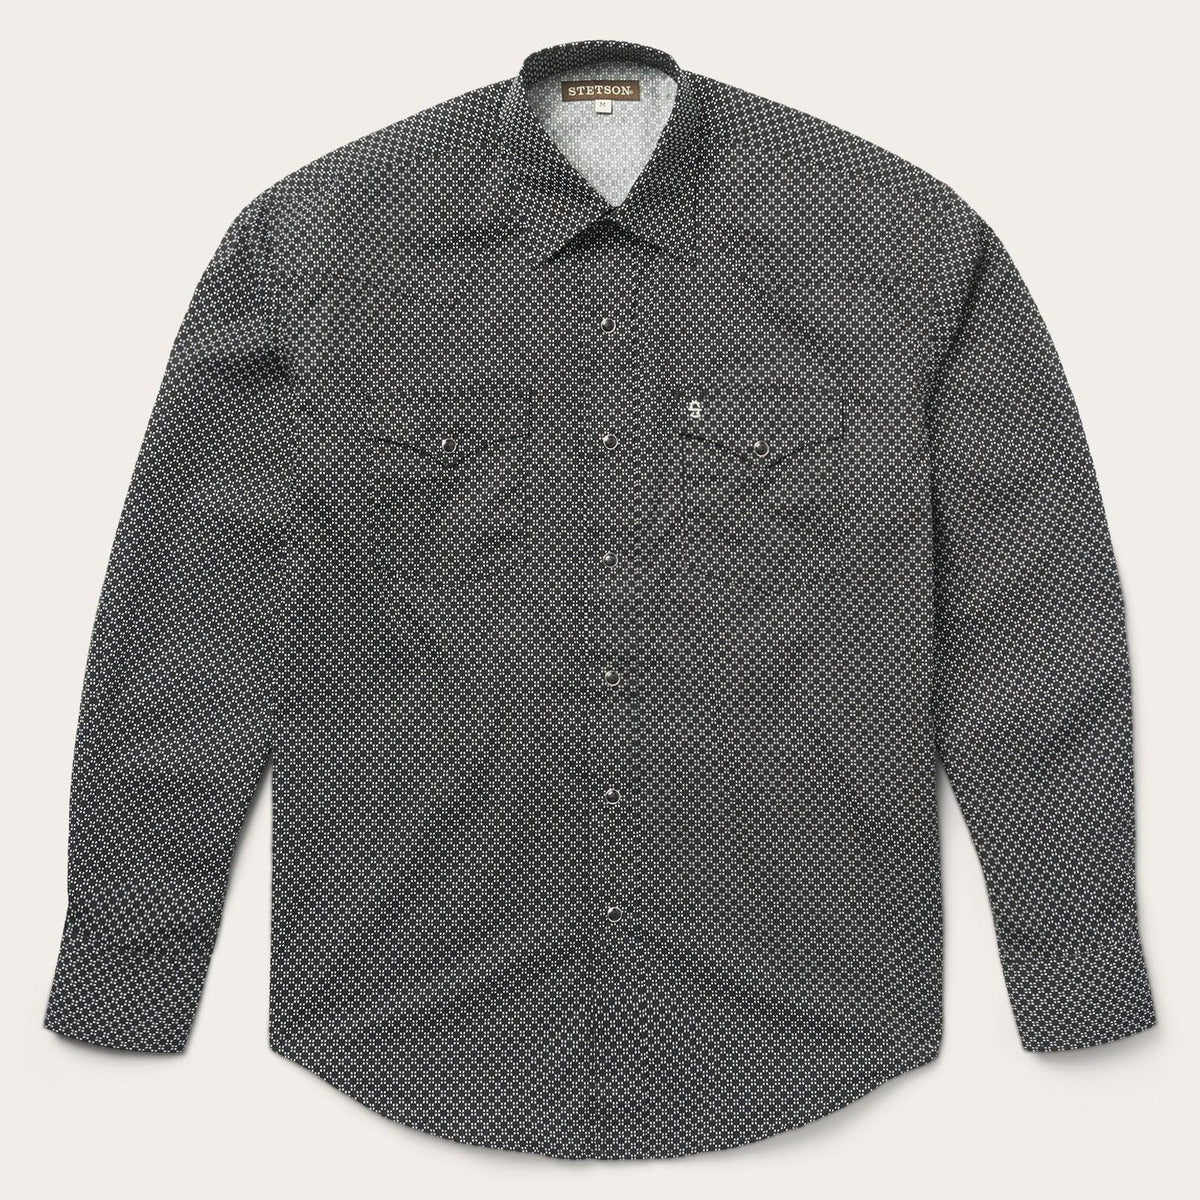 Stetson Classic Snap Front Shirt in Black & White - Flyclothing LLC